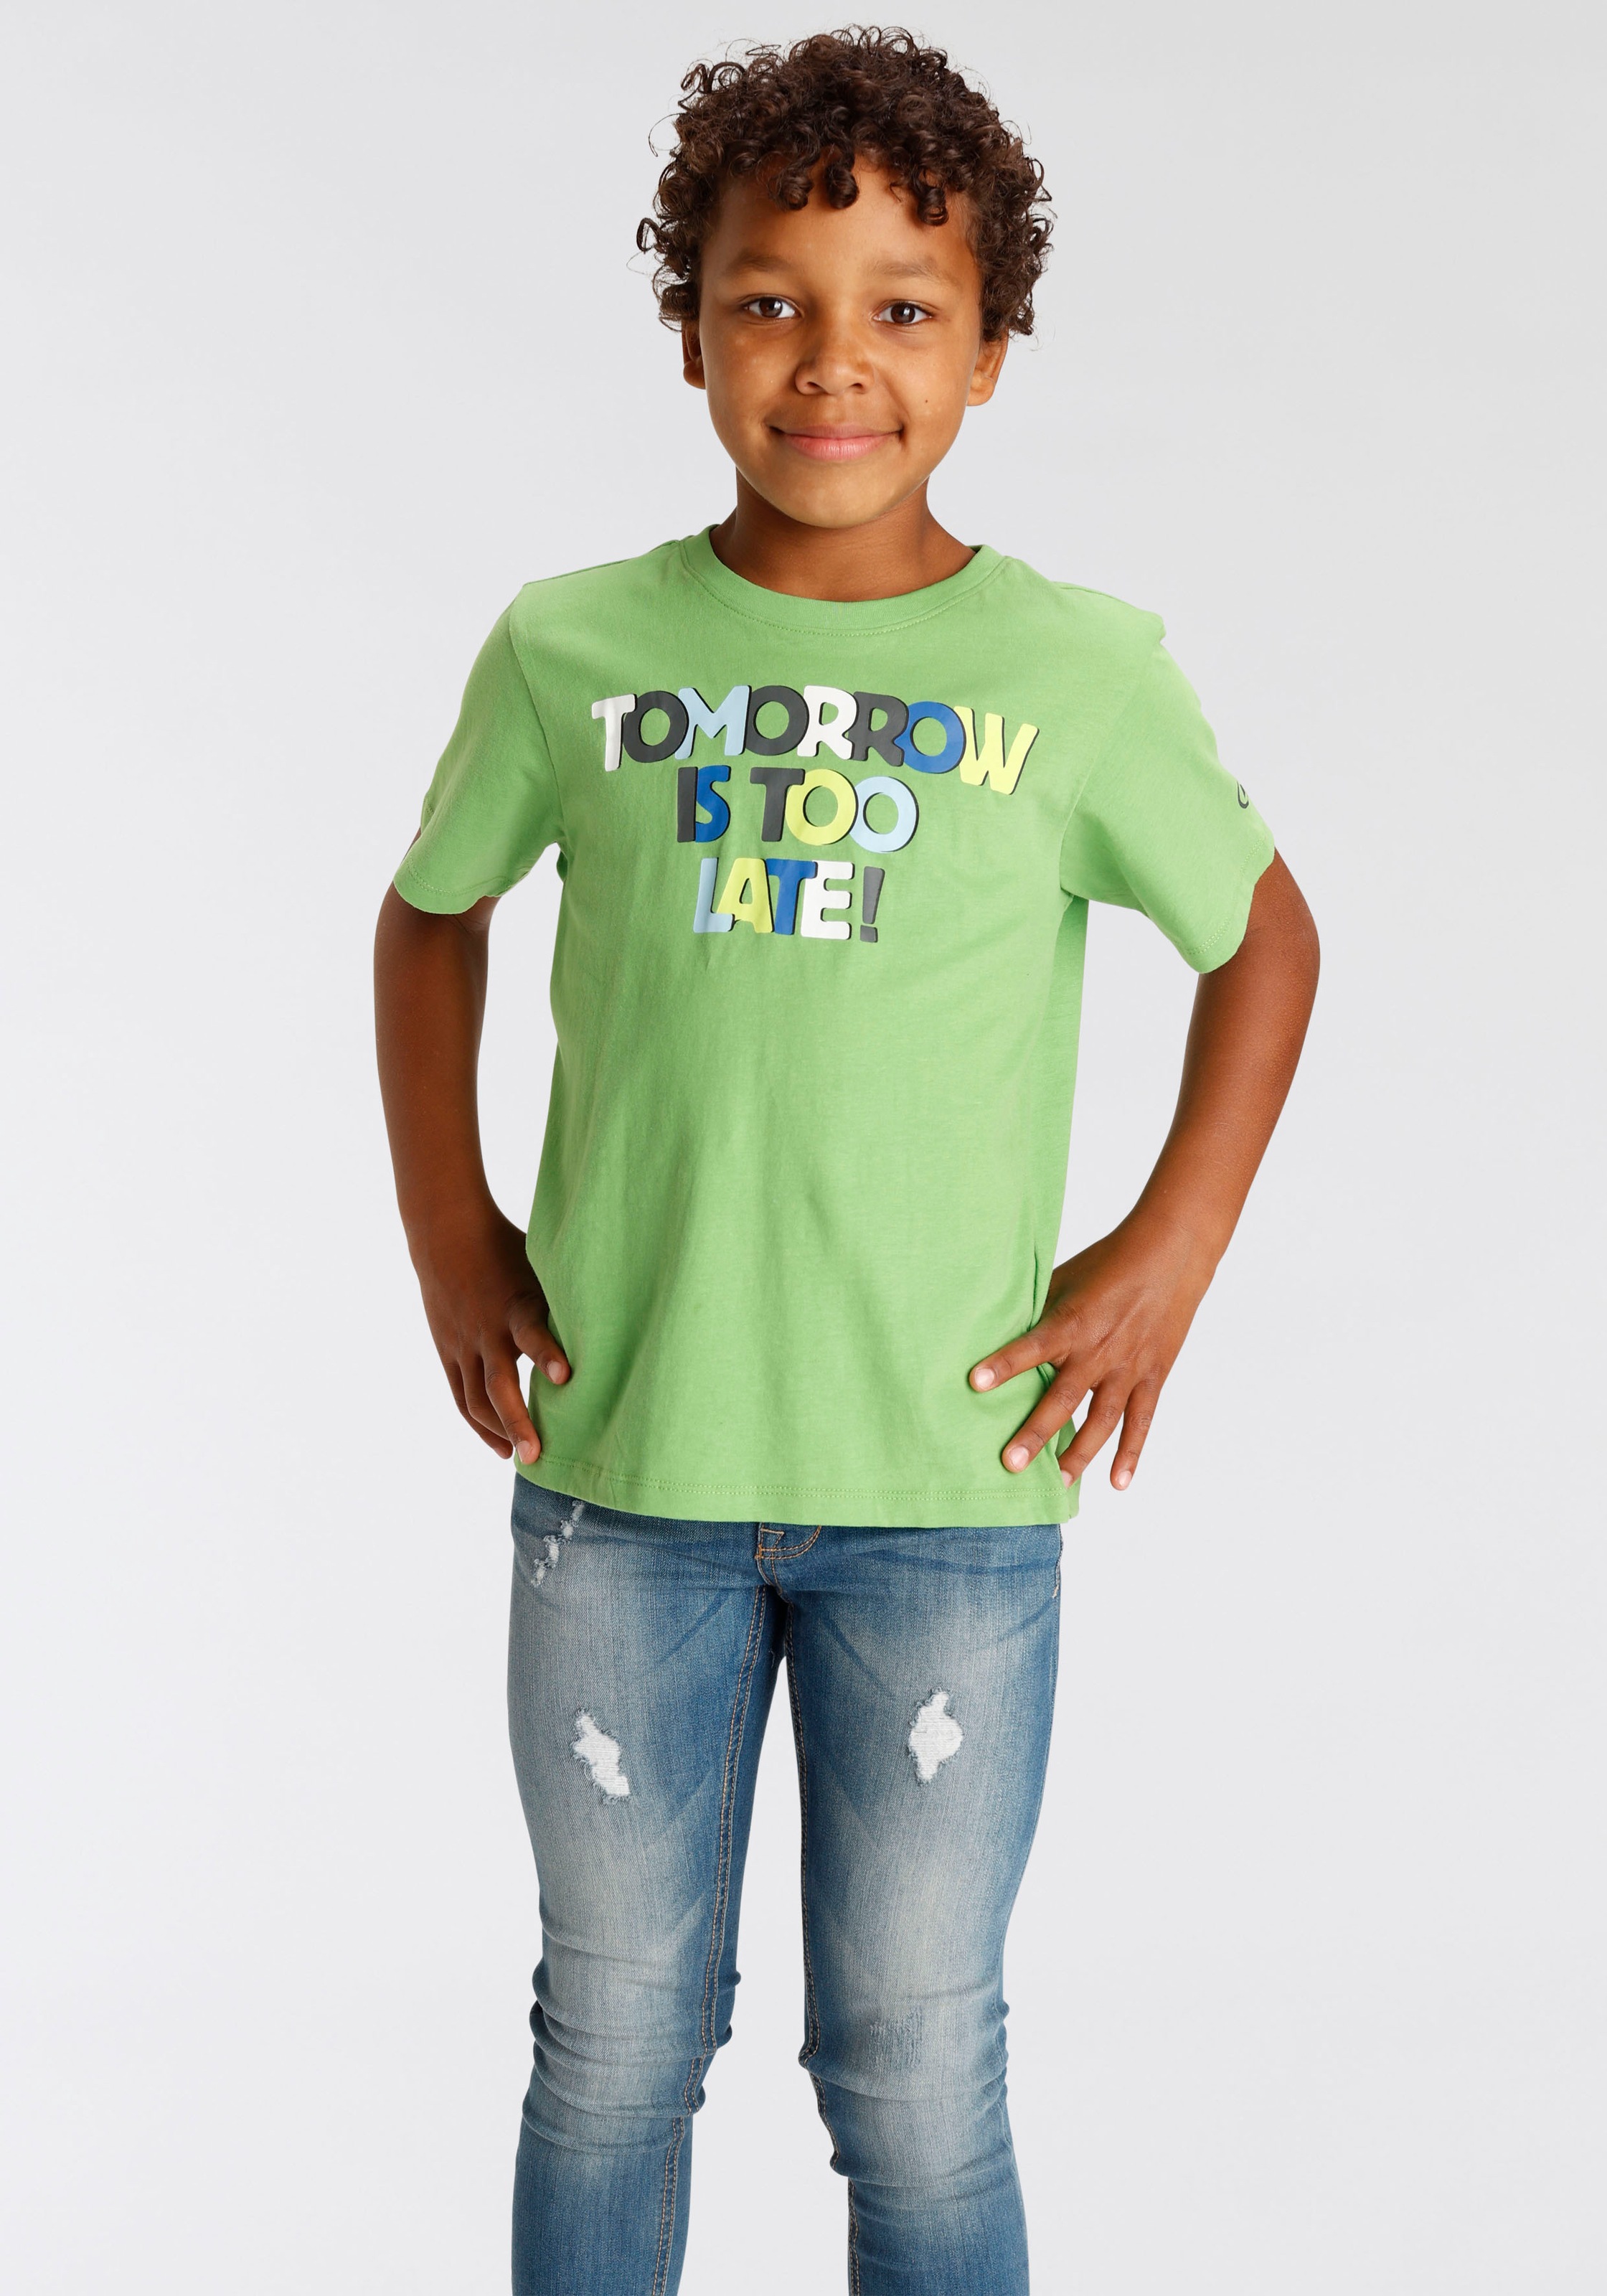 T-Shirt TOO Spruch bei IS »TOMORROW LATE«, KIDSWORLD